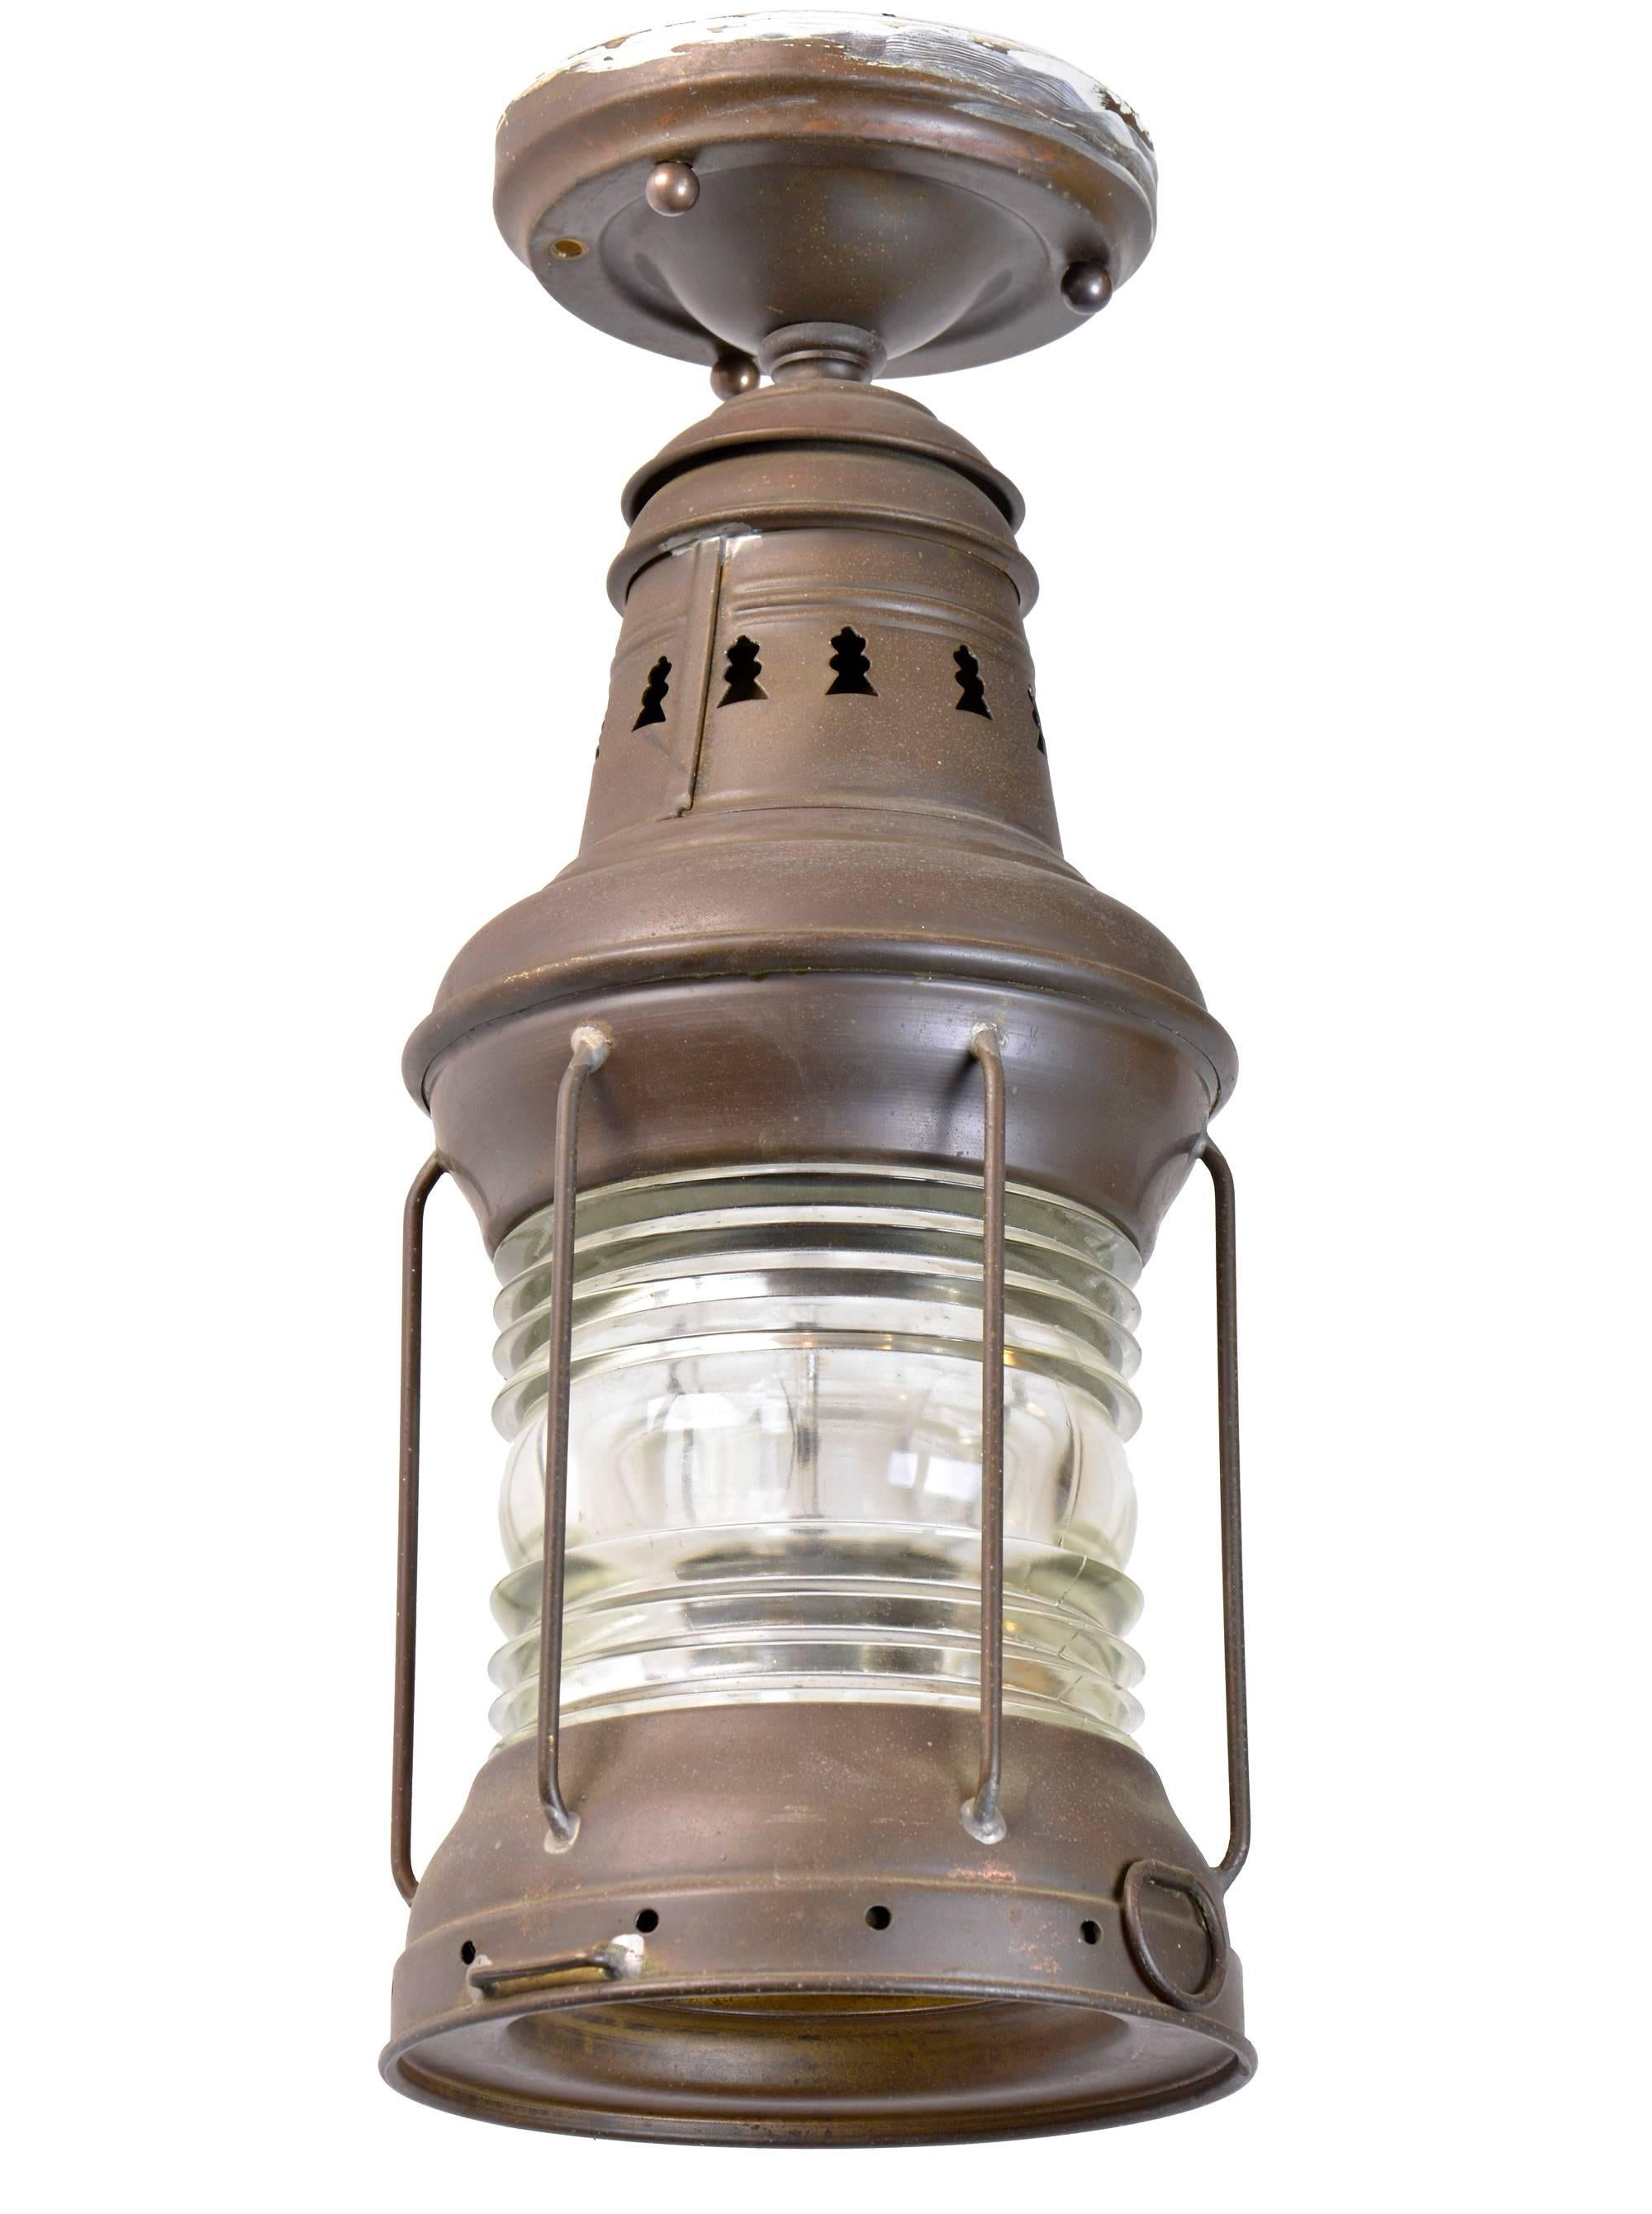 An original flush mount brass ship lantern with ribbed glass, manufactured by Russell & Stoll, circa 1940. This lantern is full of character, the perfect Industrial fixture to light a room!

We find that early antique lighting was designed as